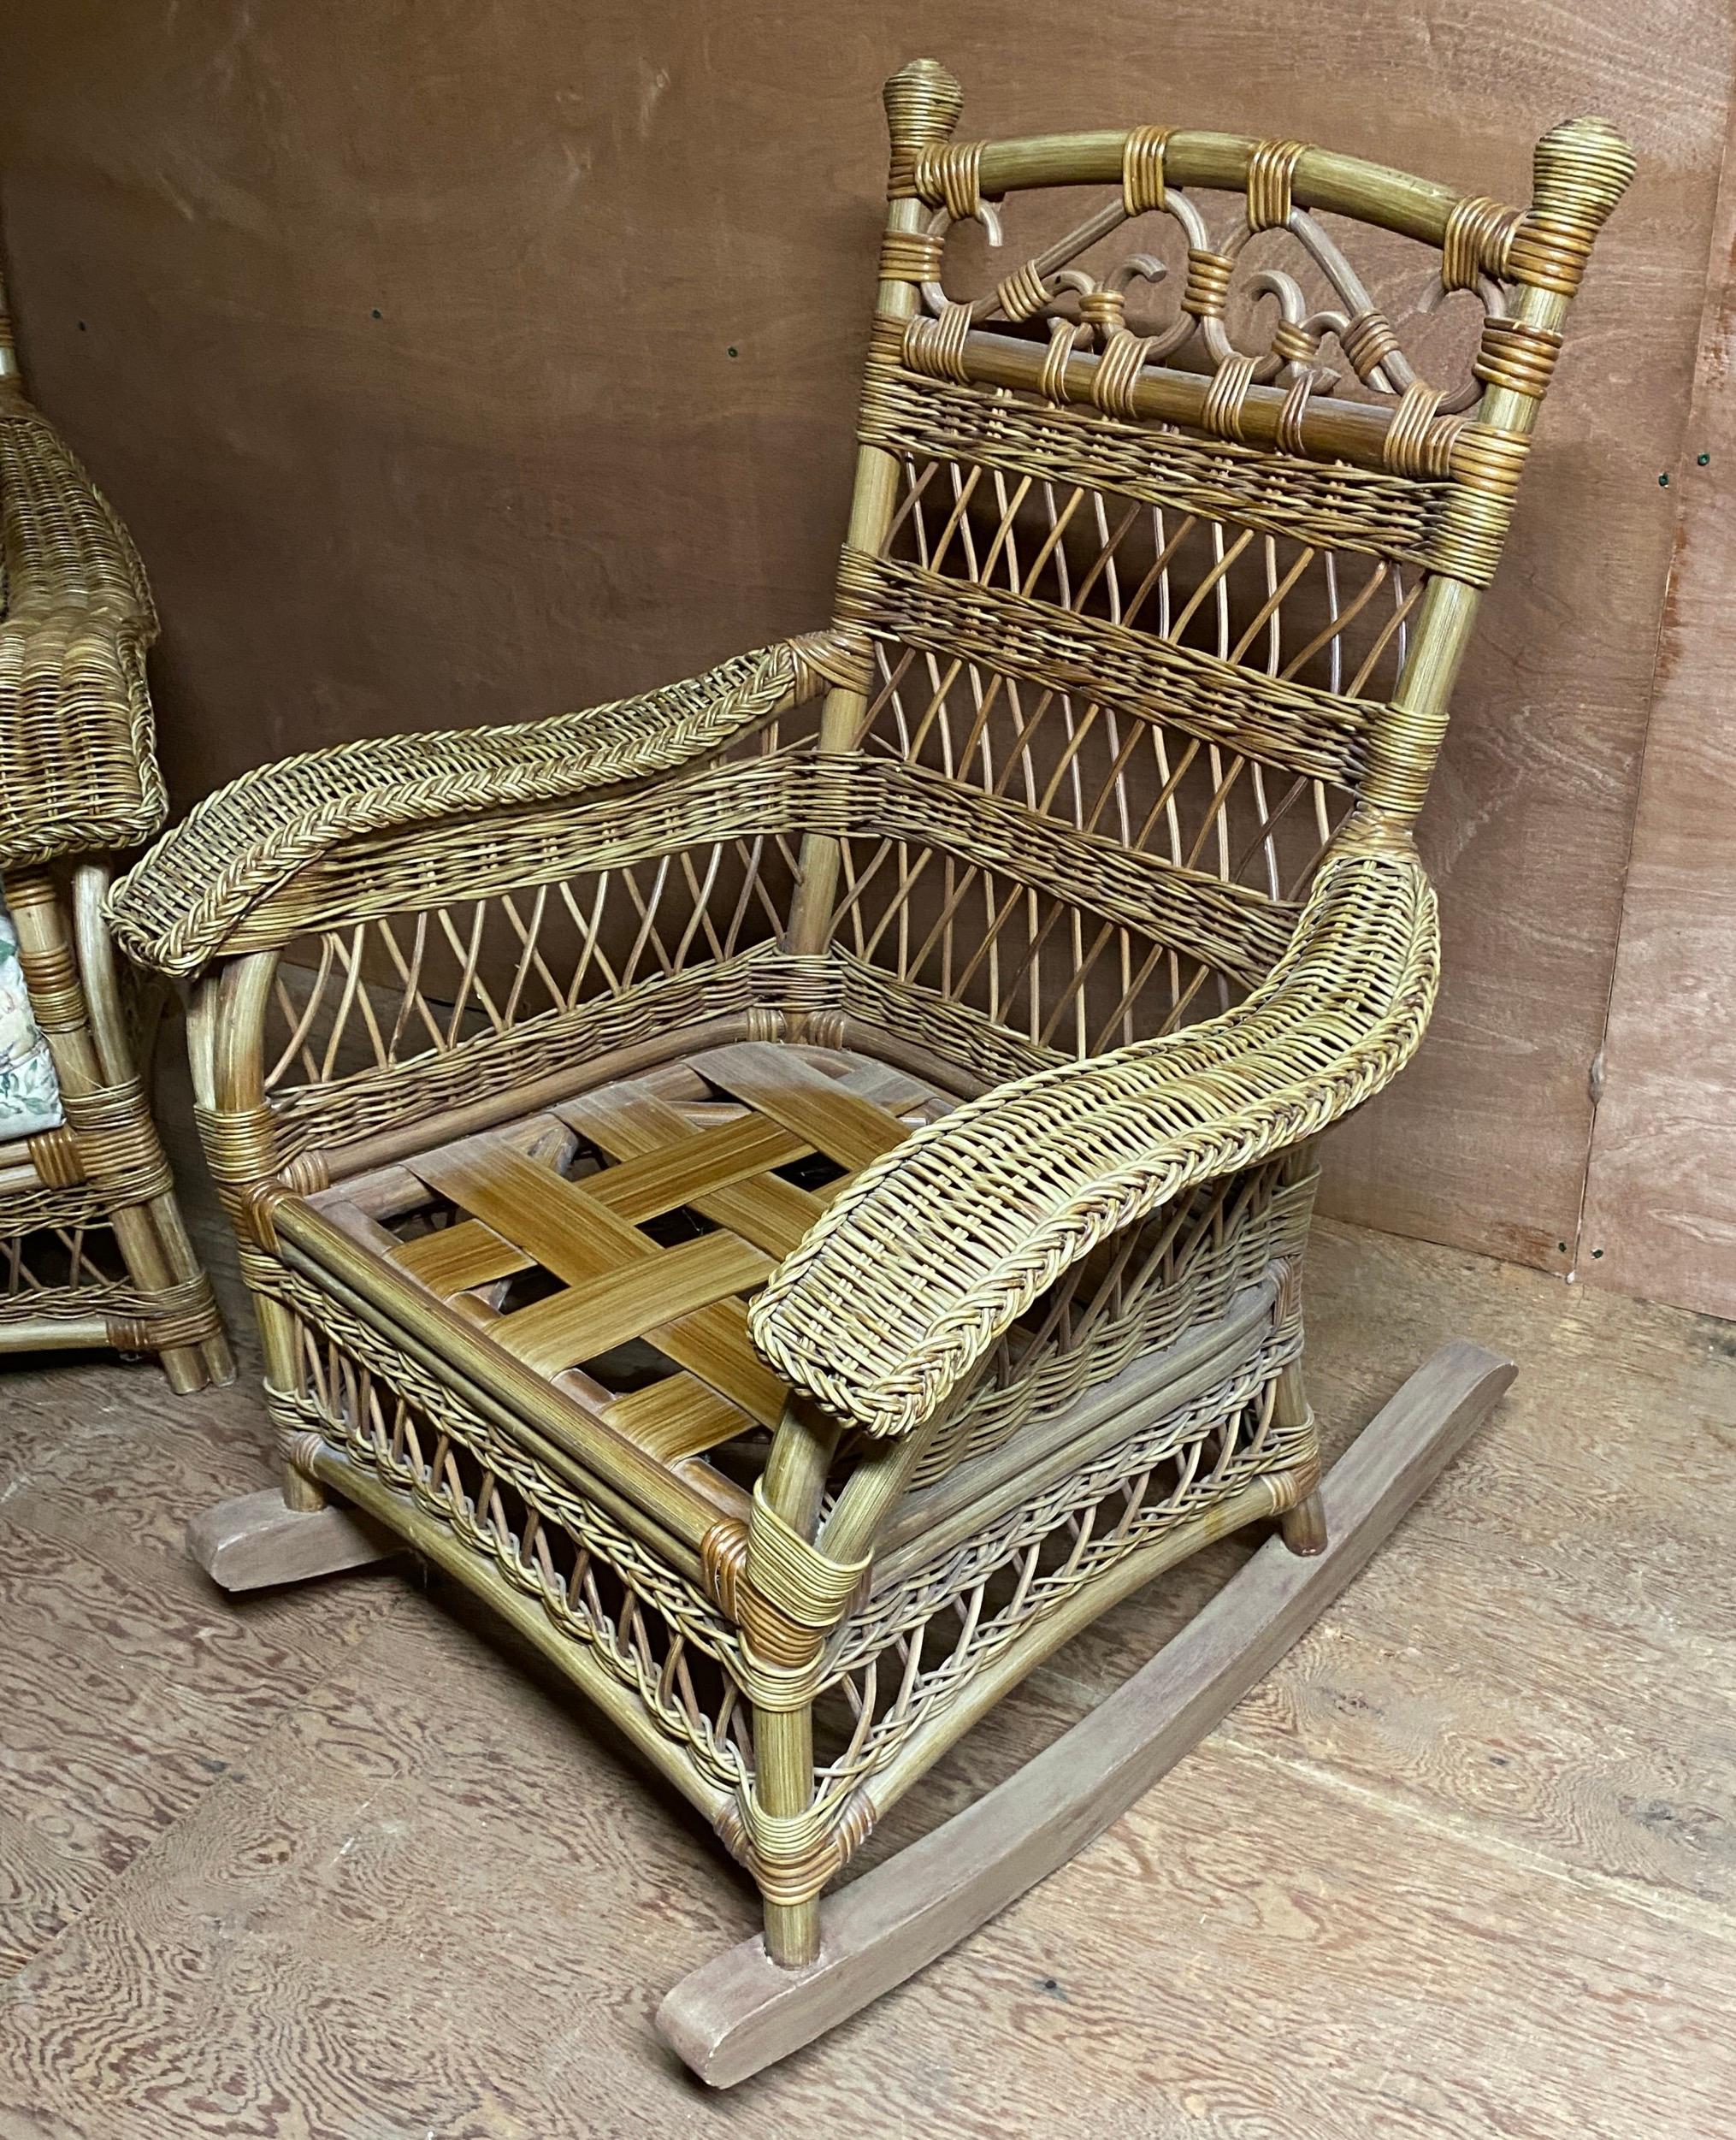 19th Century American Victorian 5 Piece Wicker Porch Seating Ensemble For Sale